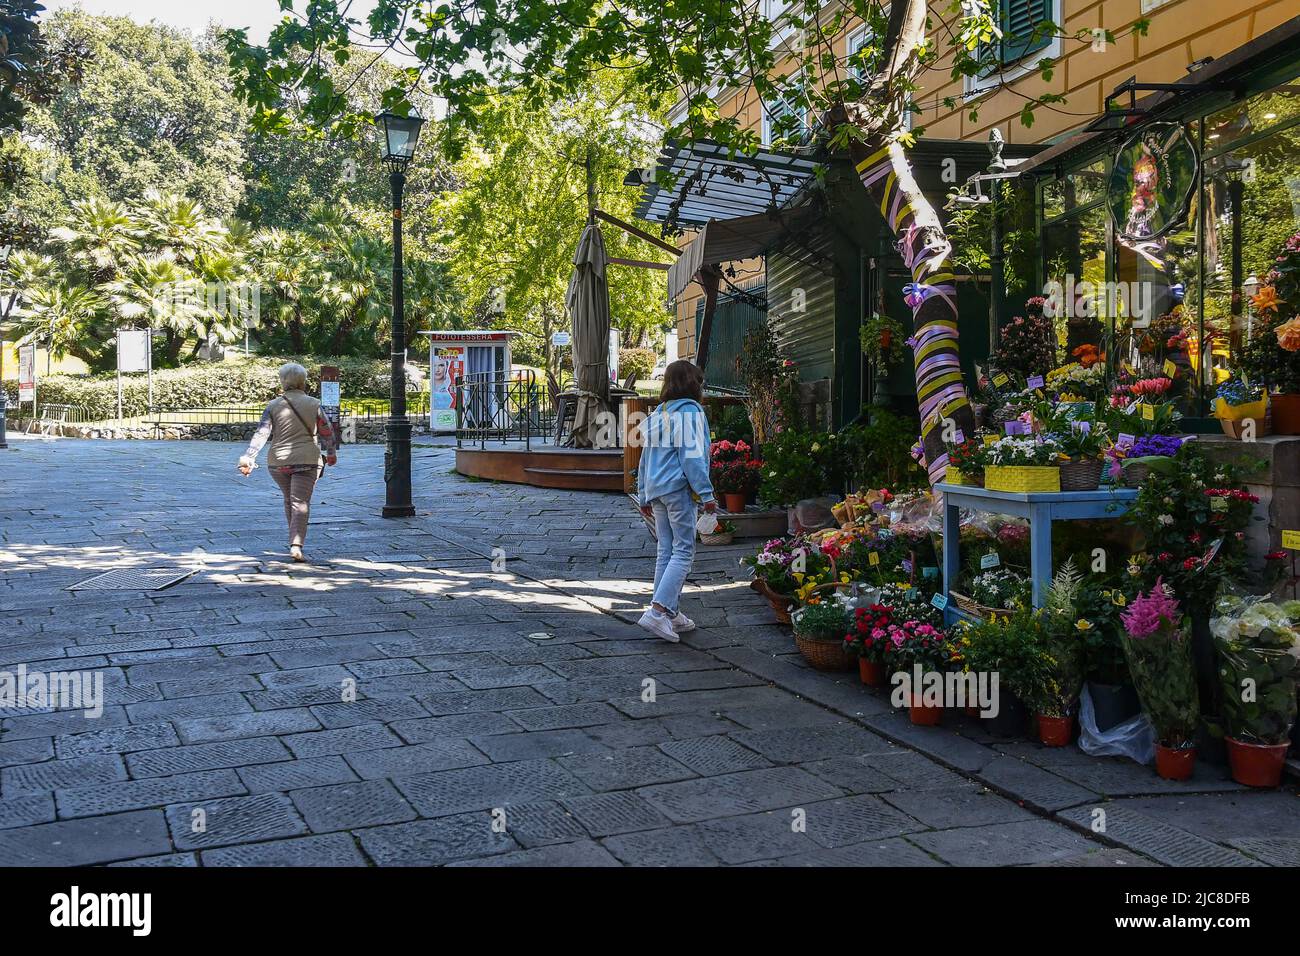 Exterior of a flower shop with blooming plants displayed on the sidewalk in Piazza Corvetto, Genoa, Liguria, Italy Stock Photo